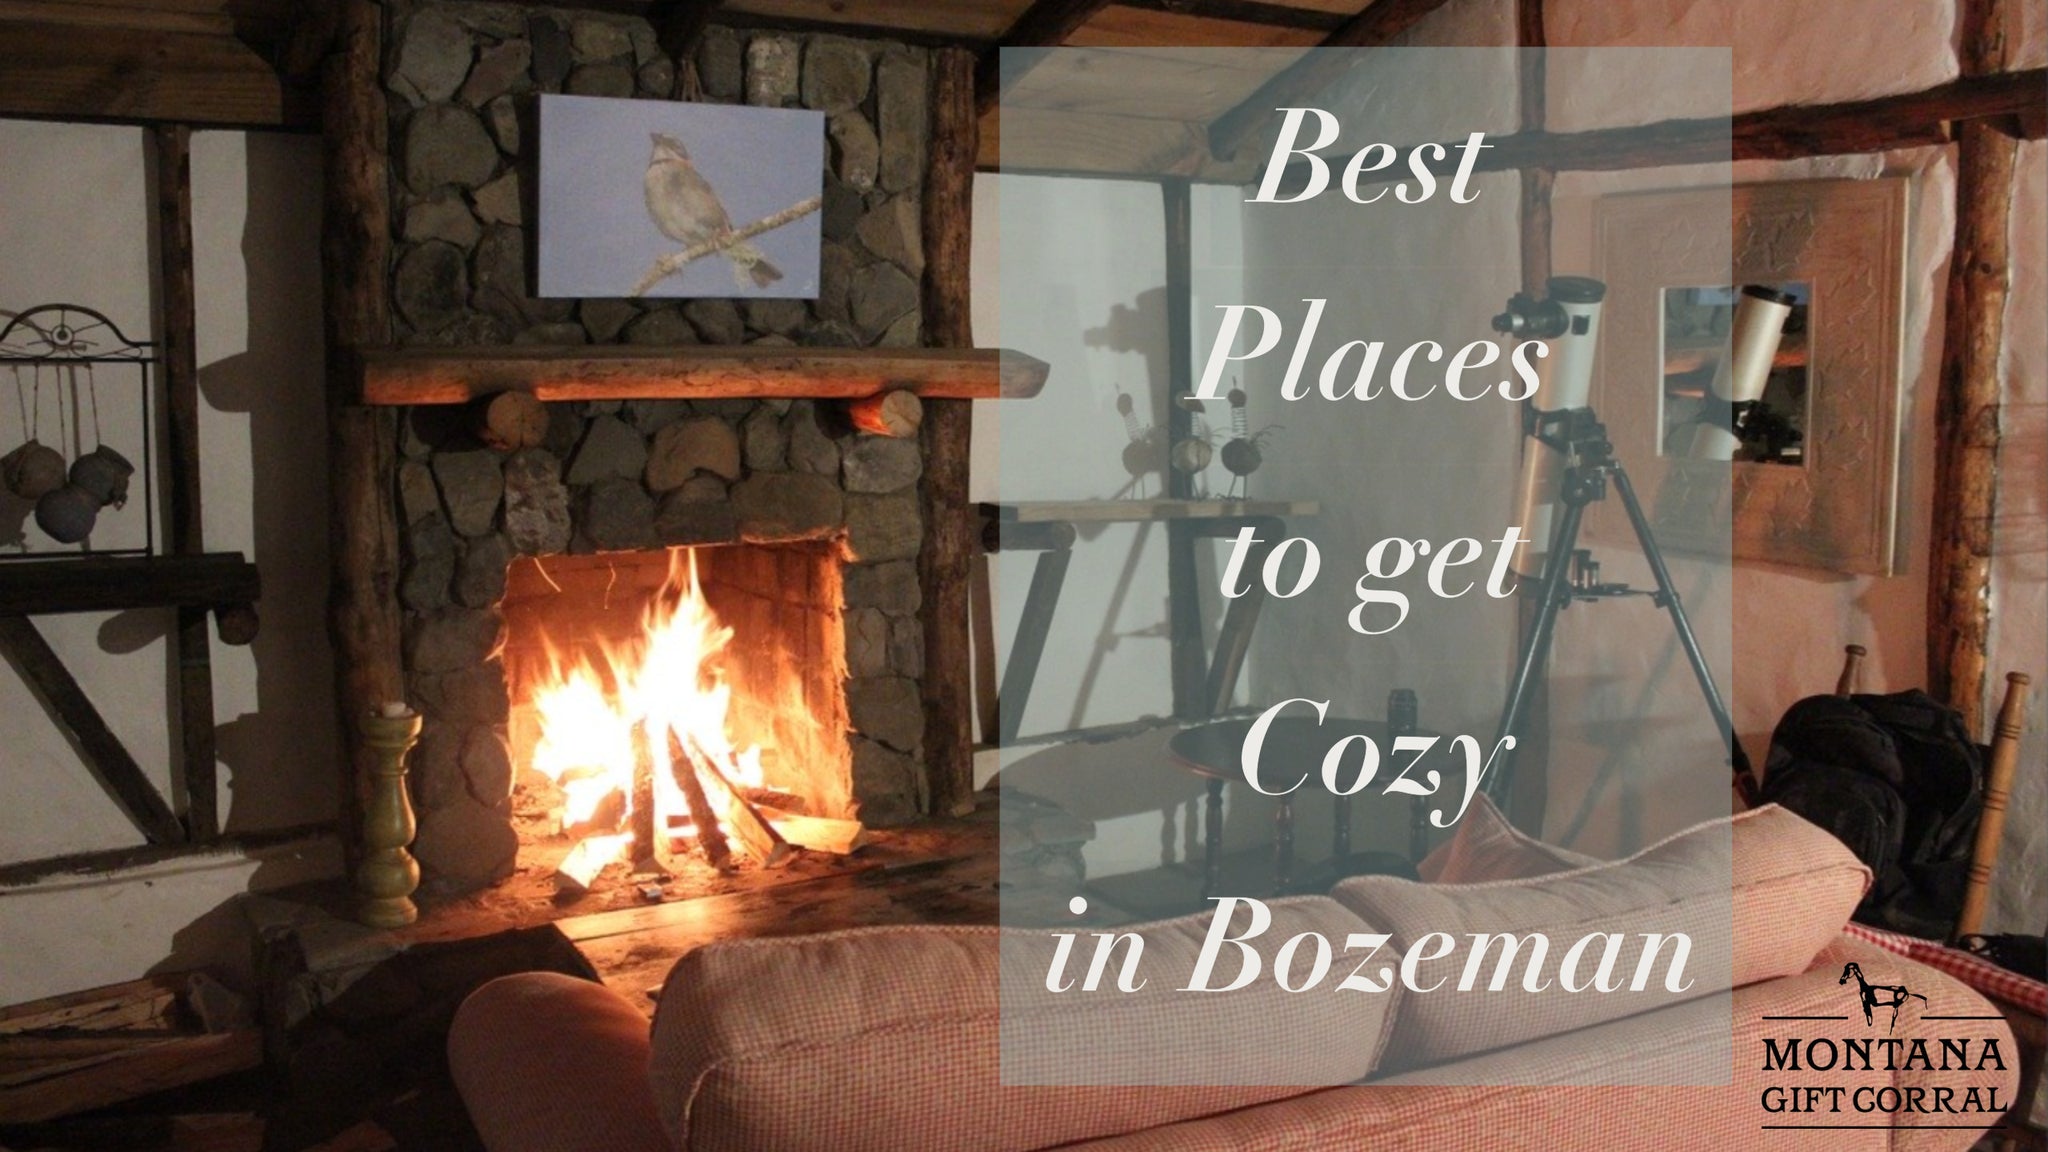 Best Places to get Cozy in Bozeman